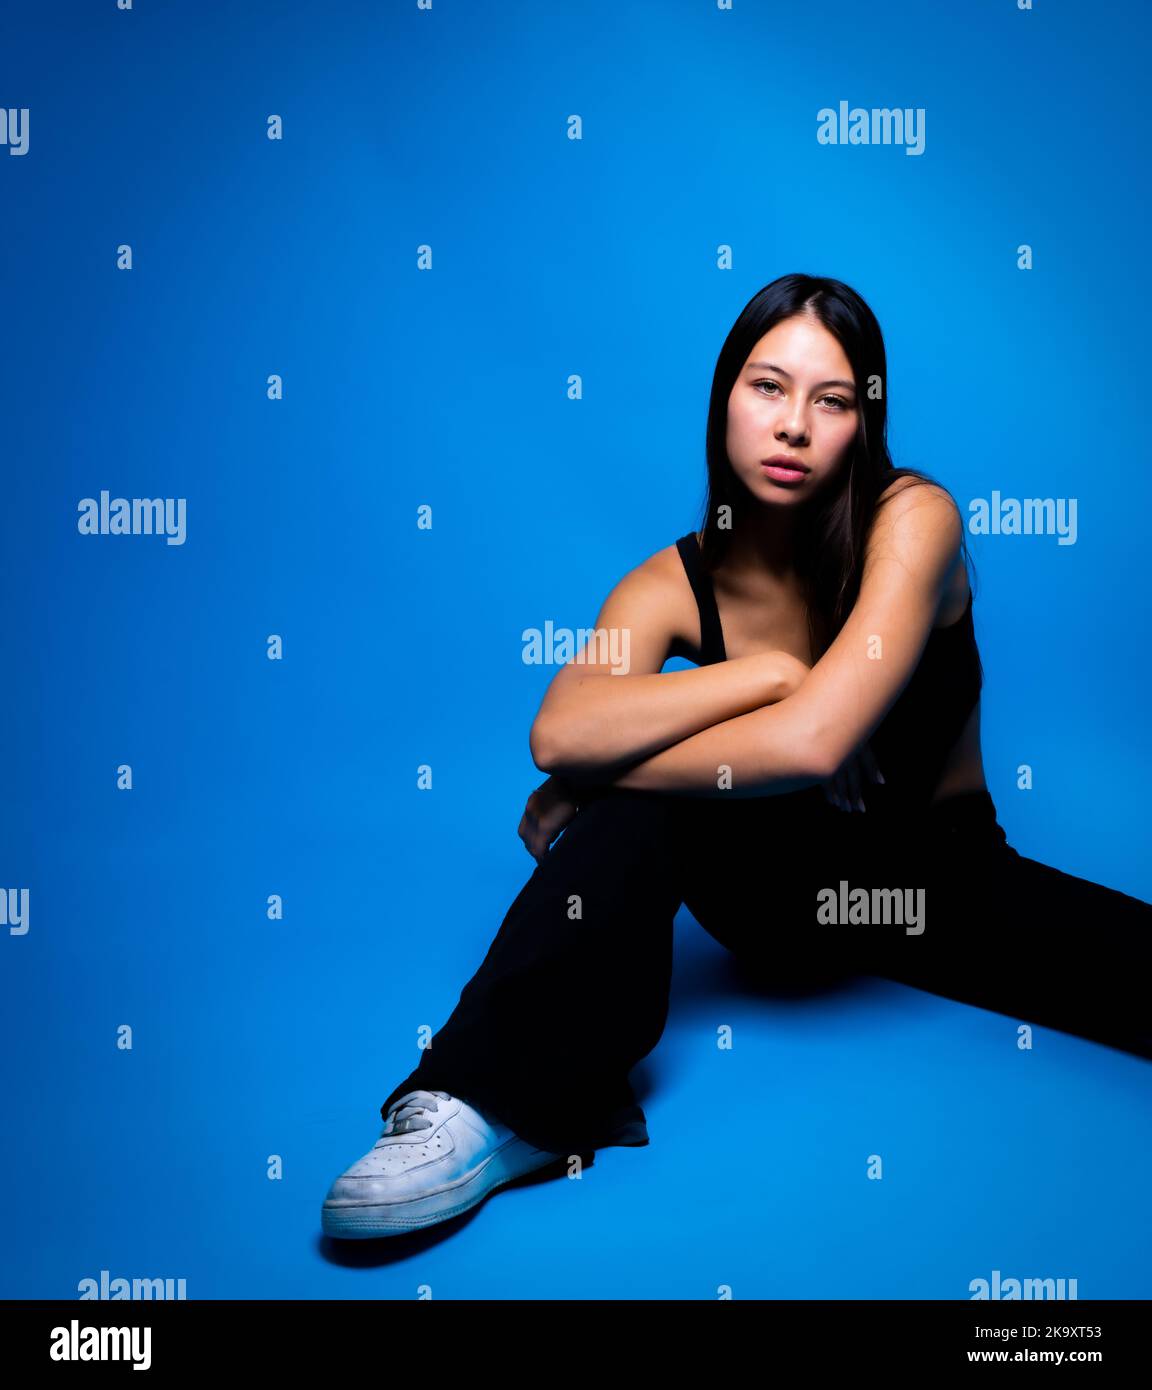 Serious Looking Multiracial Young Woman Seated With Space for Copy on Blue Background Stock Photo